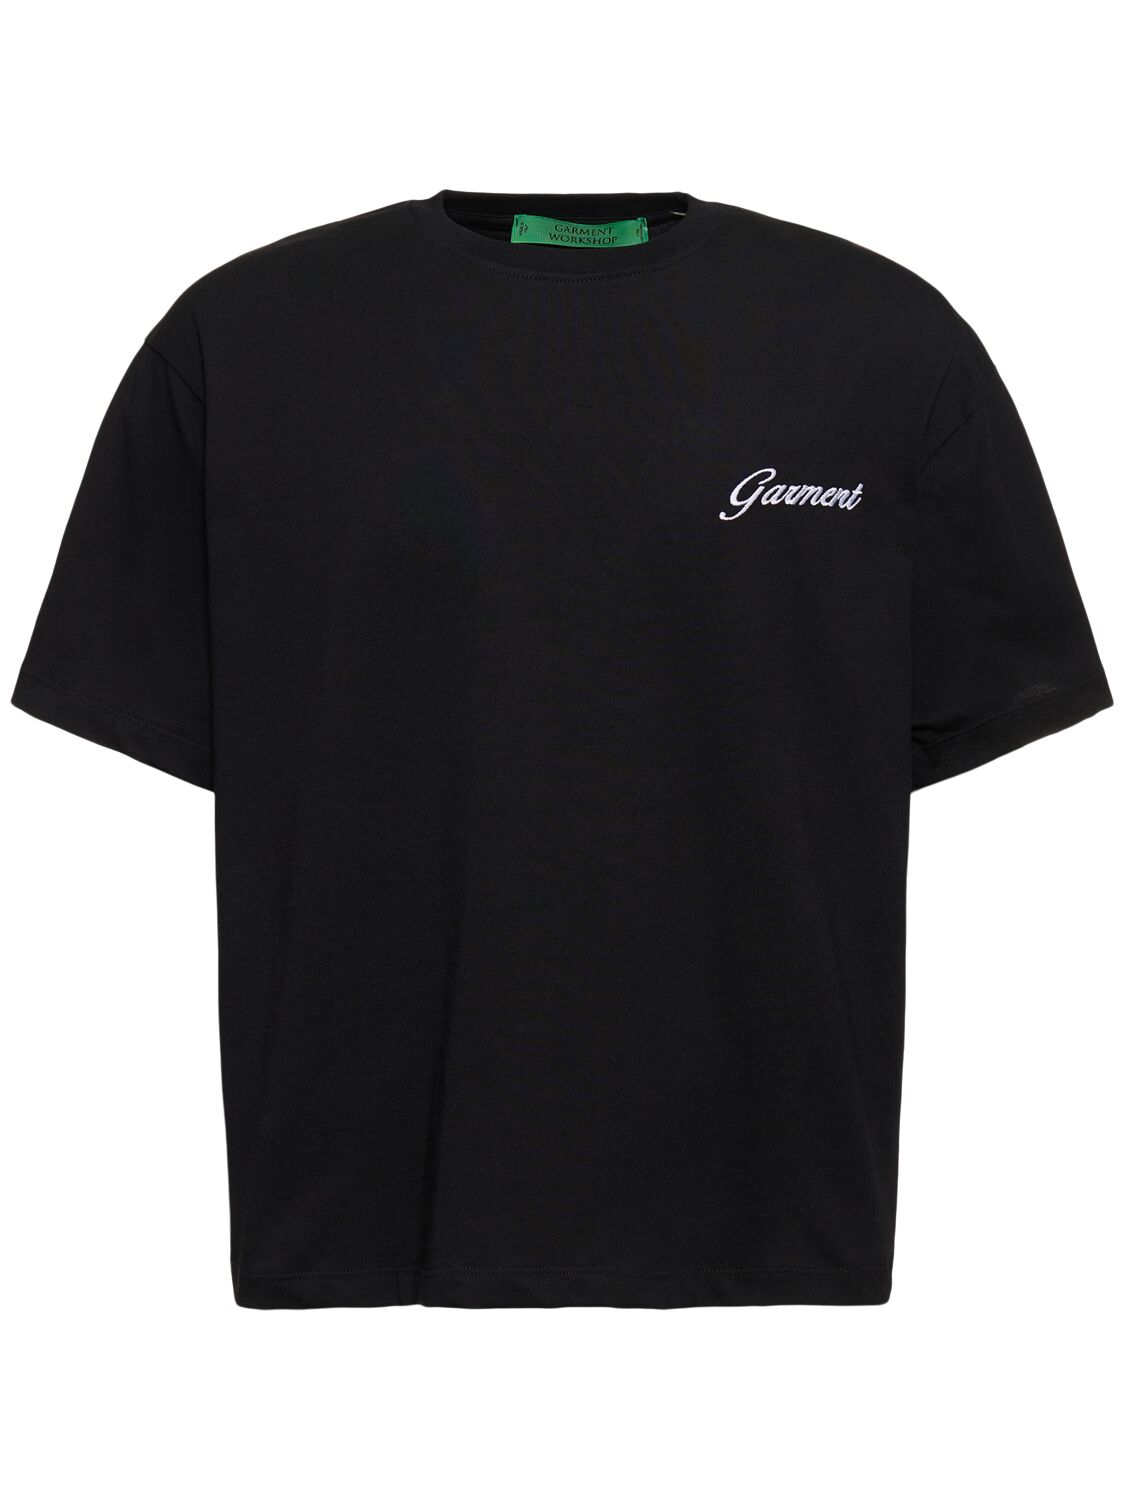 Garment Workshop If You Know You Know Embroidered T-shirt In Chaos Black